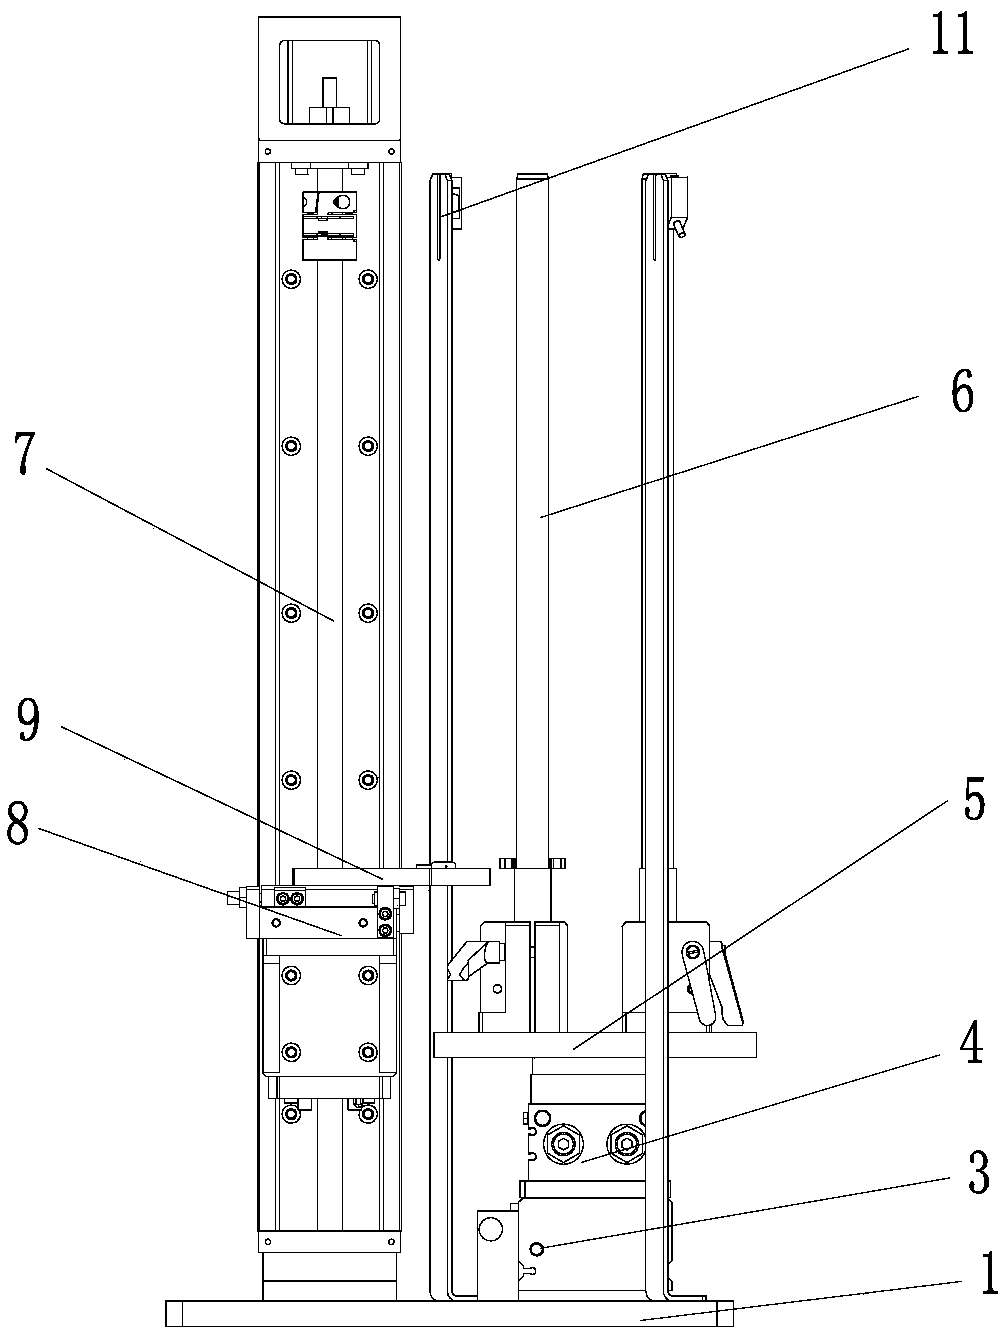 Cylindrical feeding mechanism for iron cores